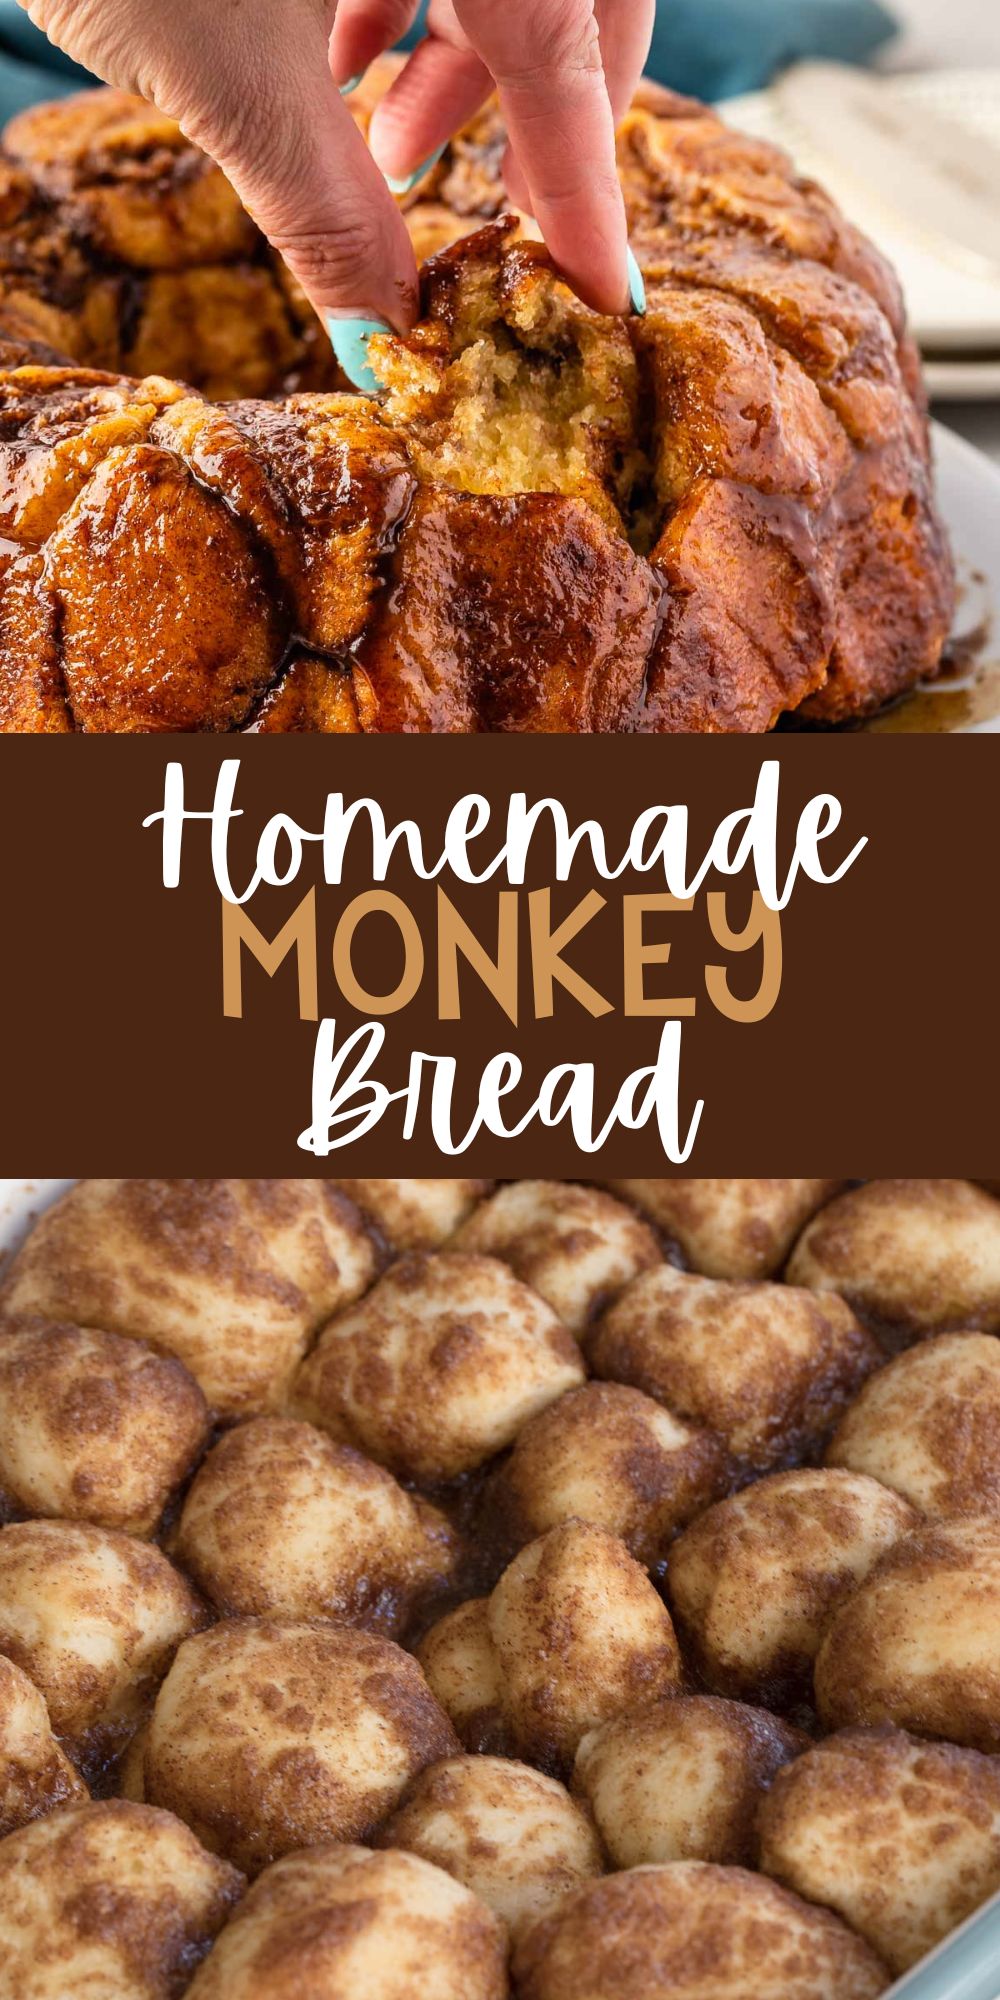 two photos of monkey bread on a white plate with a hand holding a piece of it with words on the image.